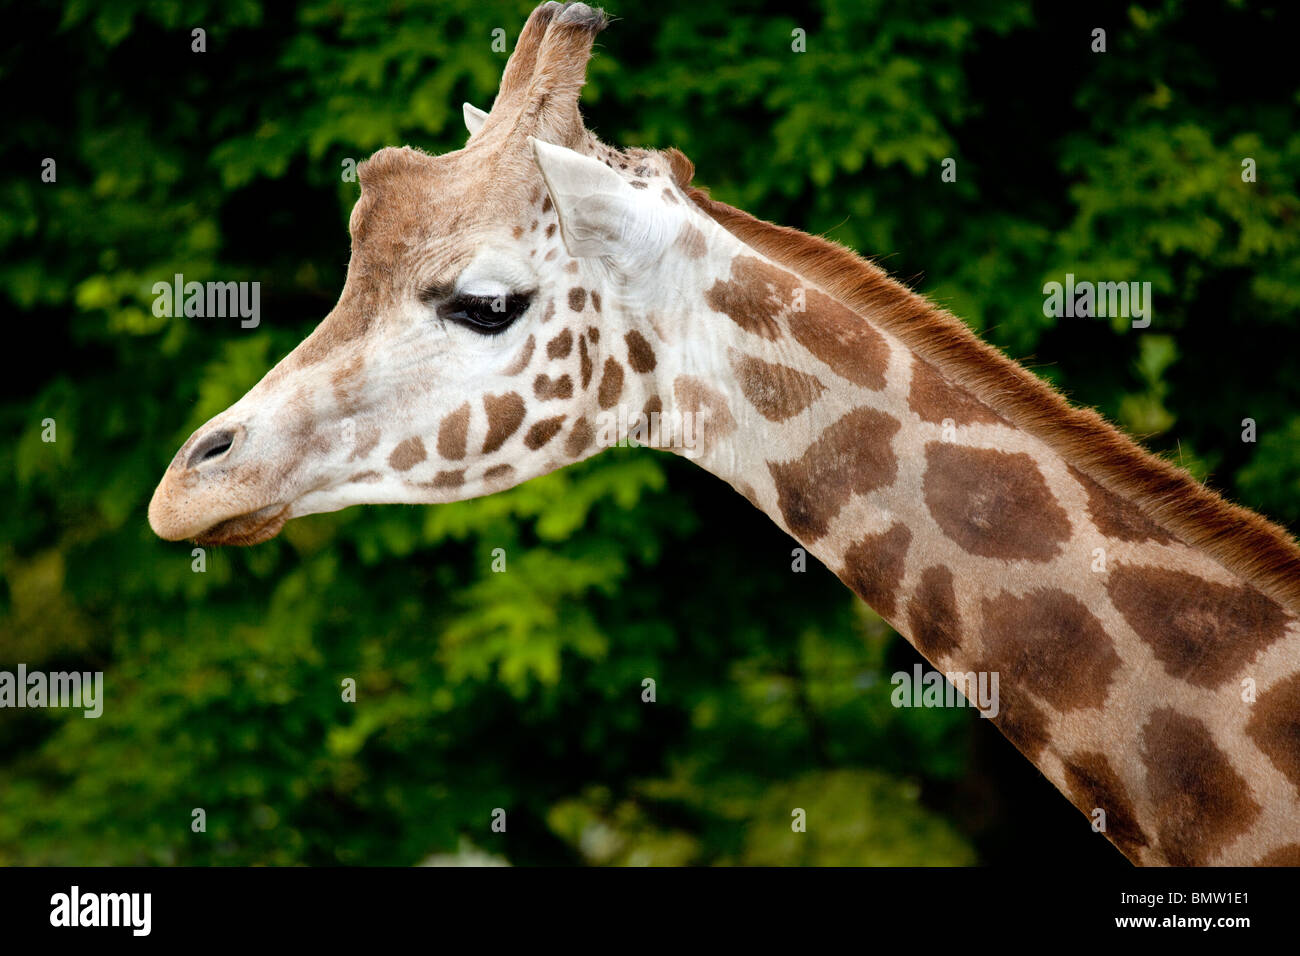 A landscape view of a Giraffe head and neck Stock Photo